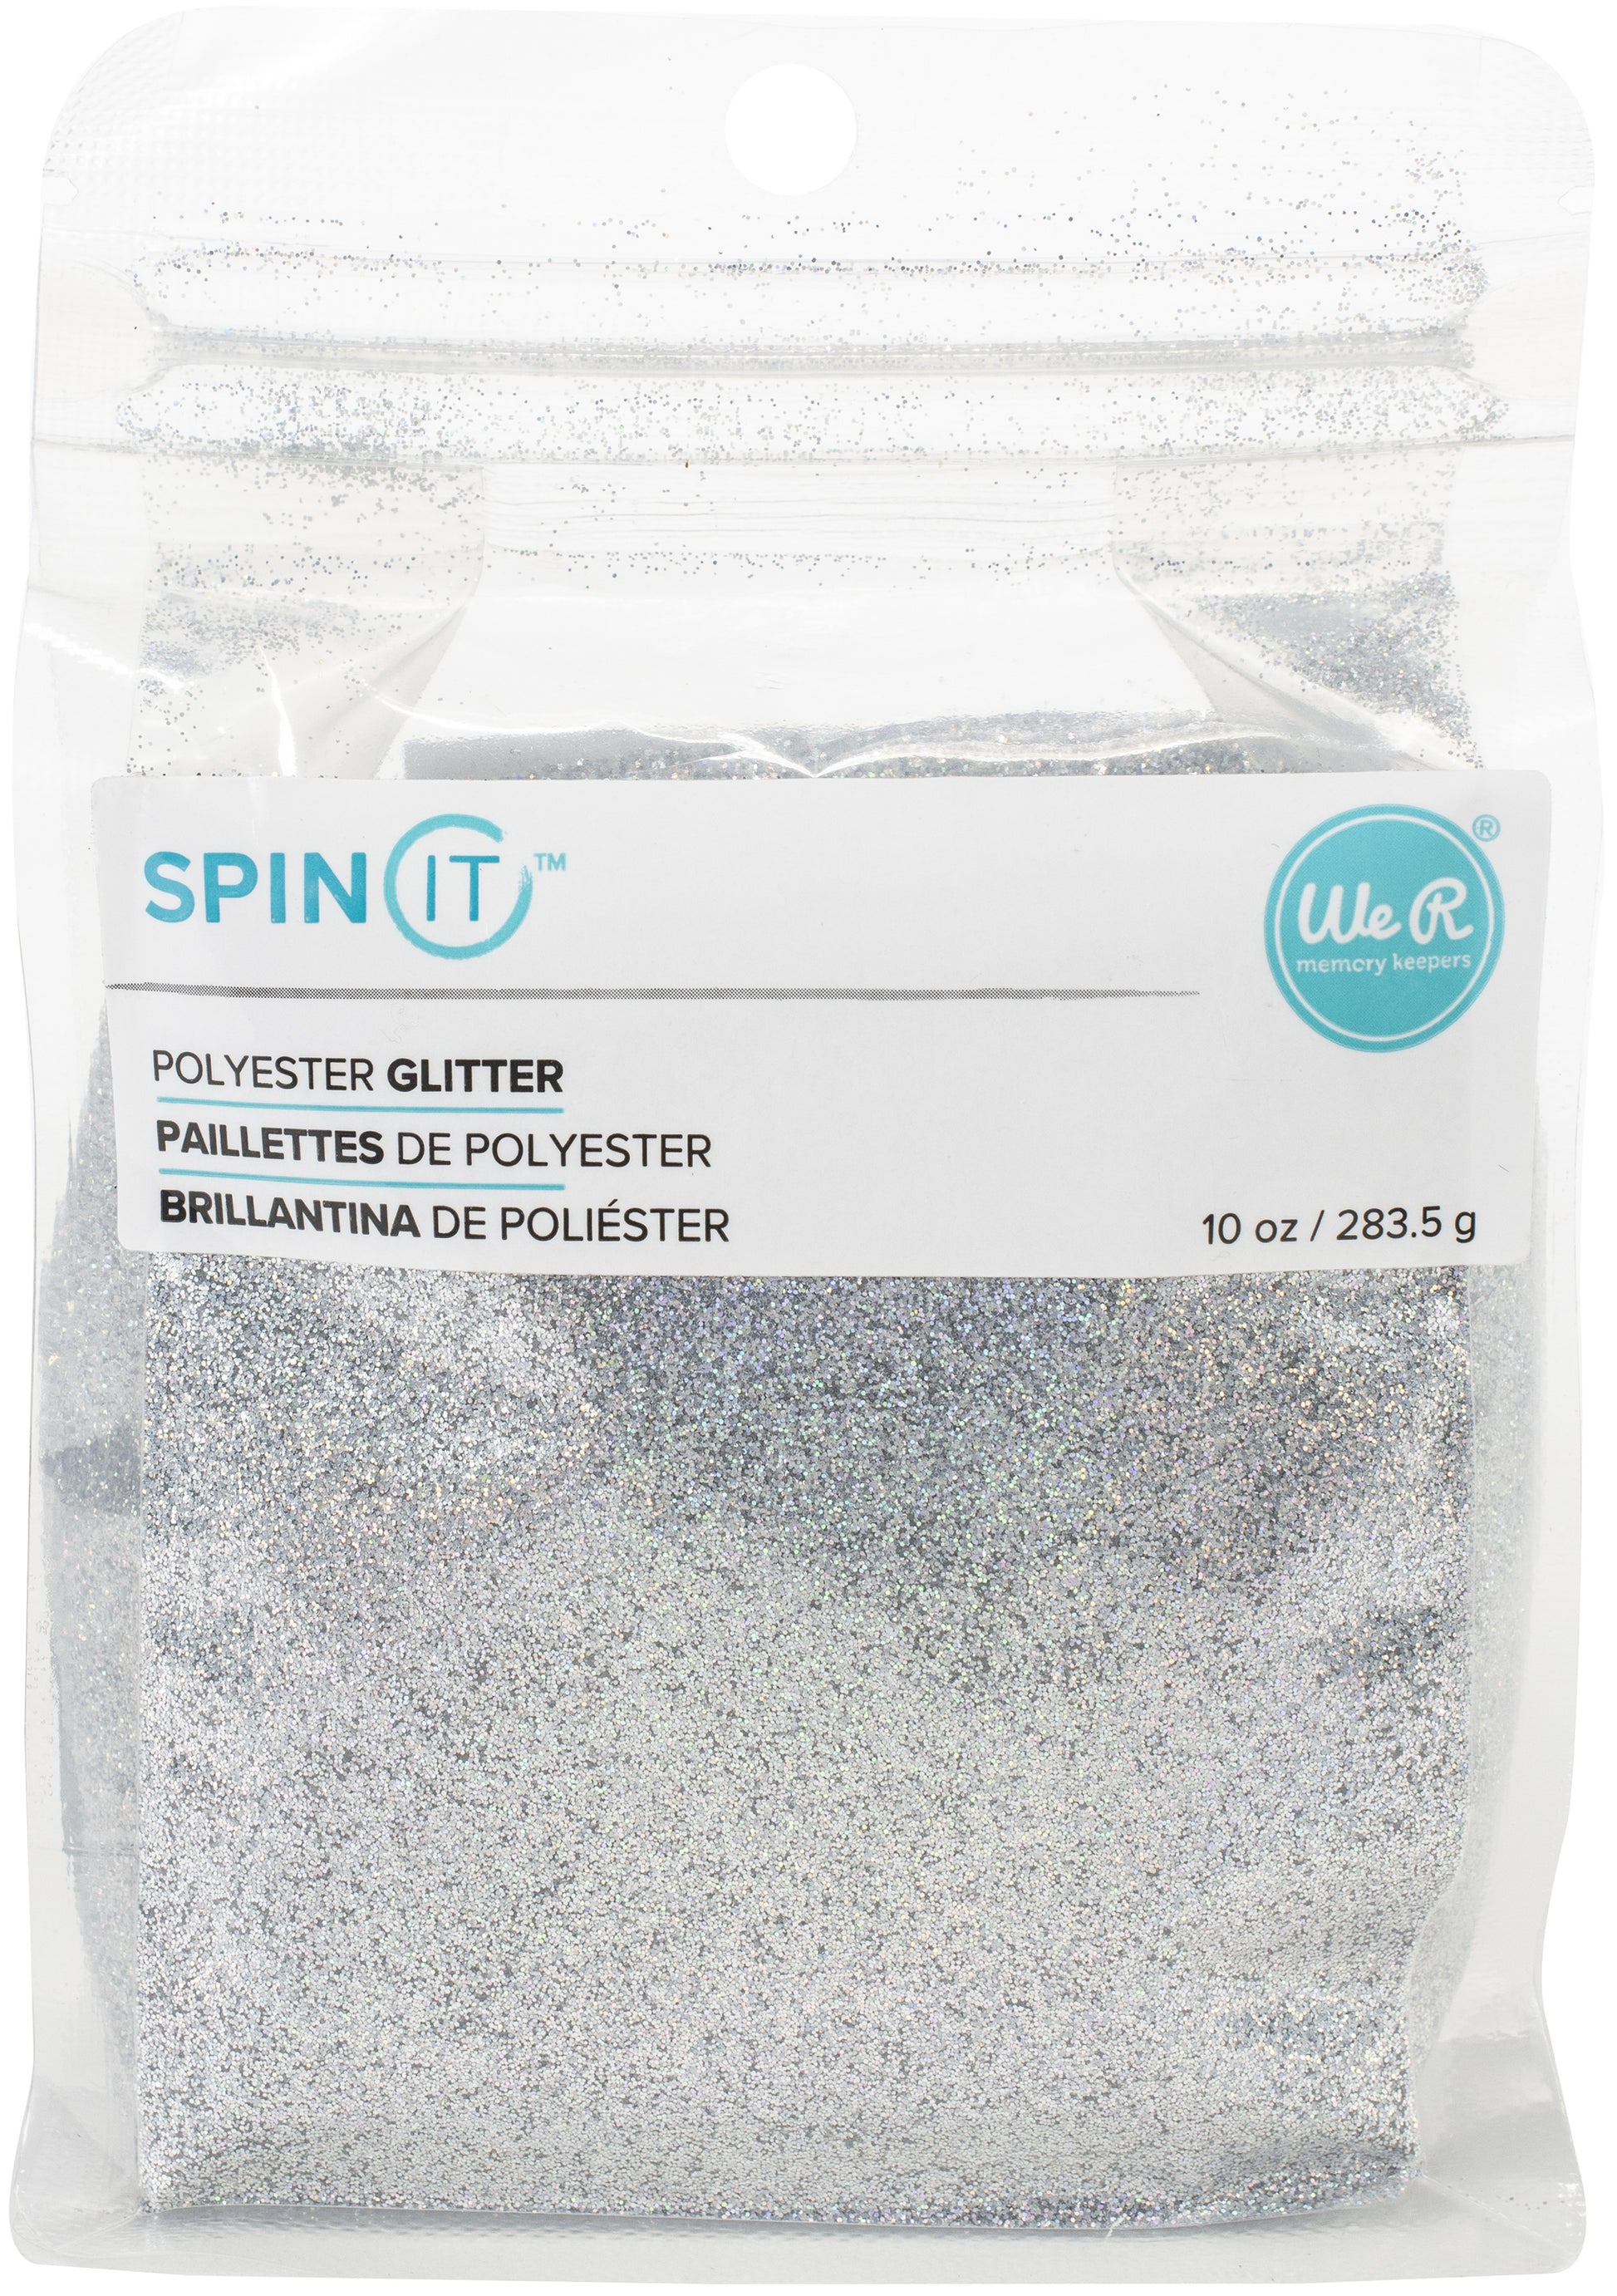 We R Memory Keepers Spin It Extra Fine Glitter 10oz Teal